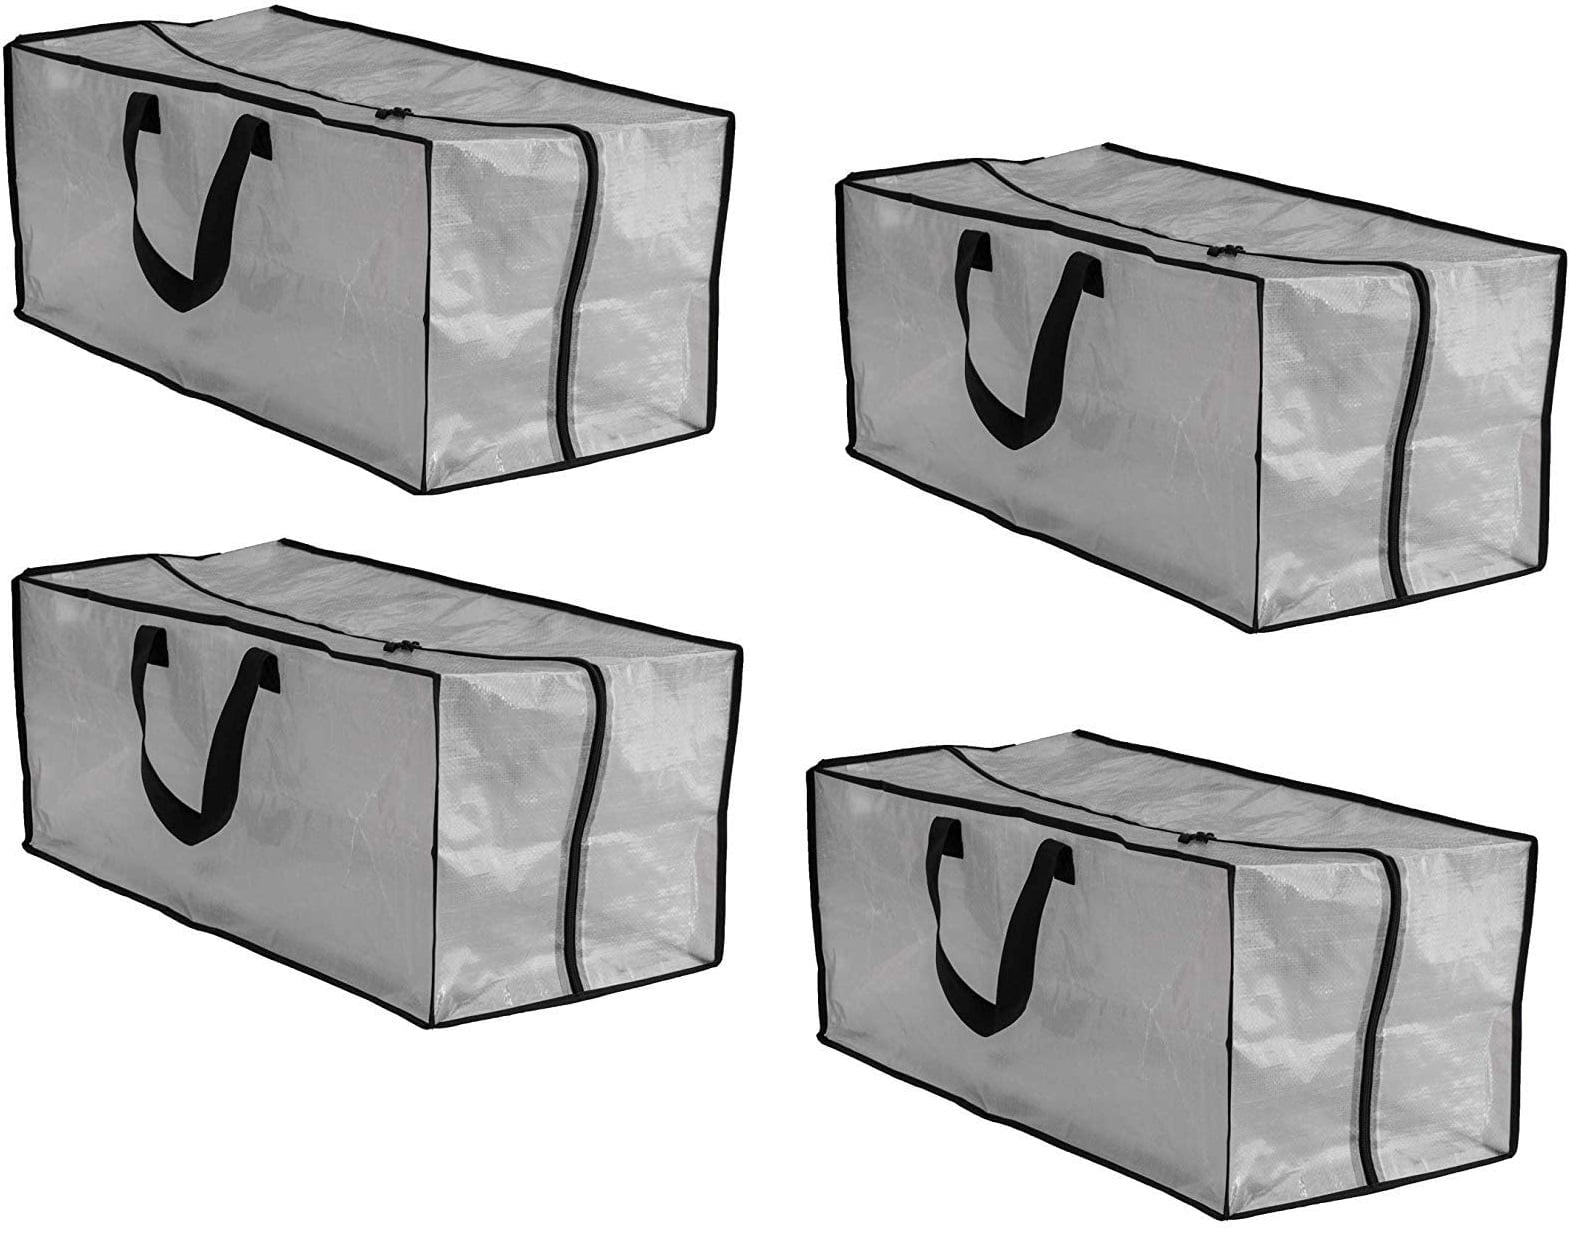 Heavy Duty Reusable Moving Totes Storage Packing Bags Large Zipper Pack of 2